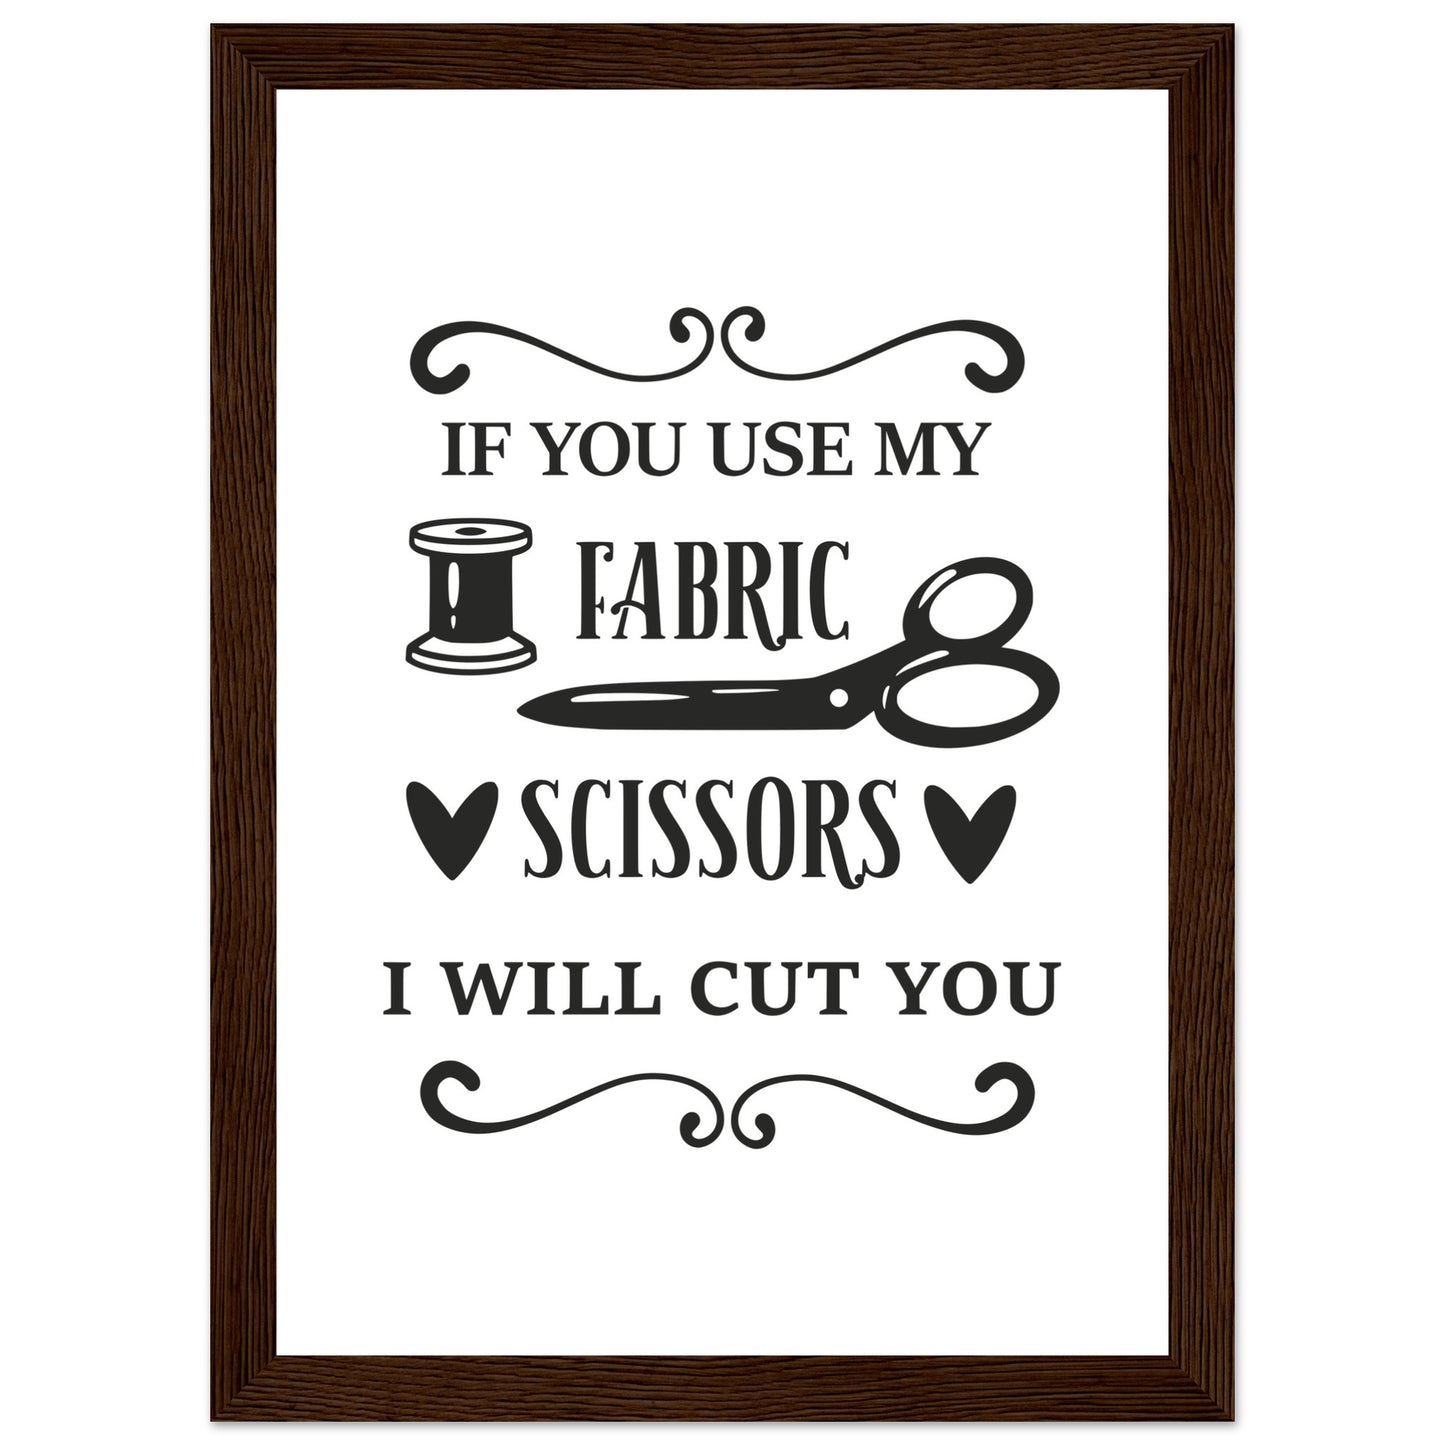 If You Use My Fabric Scissors I Will Cut You - Quilting Wall Art - Premium Matte Paper Wooden Framed Poster